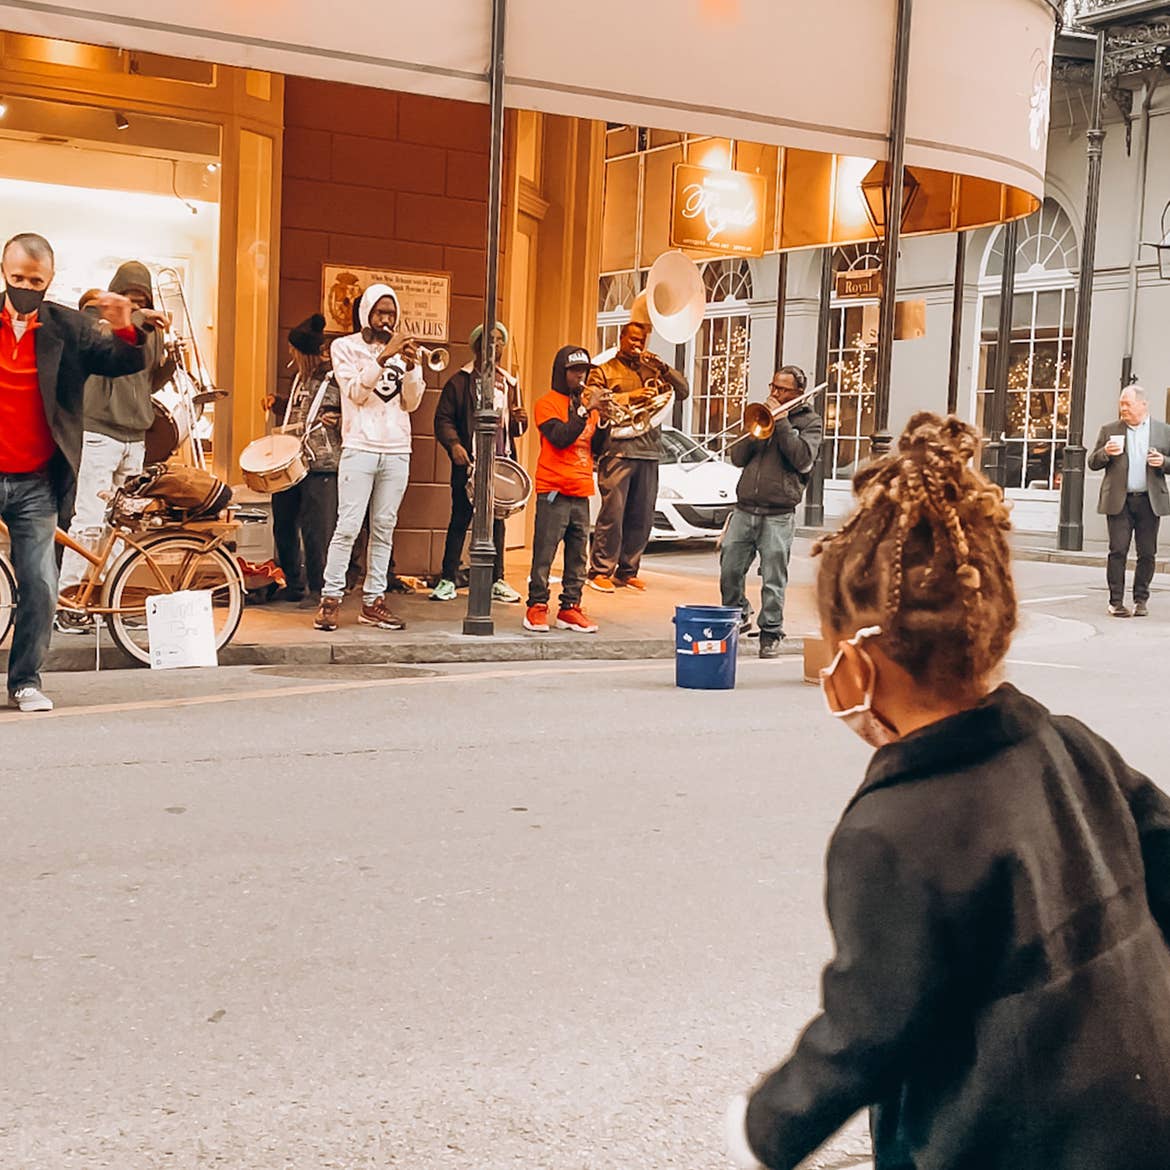 Featured Contributor, Sally Butan of @butanclan's daughter wears a mask and jacket while dancing to a live brass band on Bourbon St. in New Orleans, Louisiana.